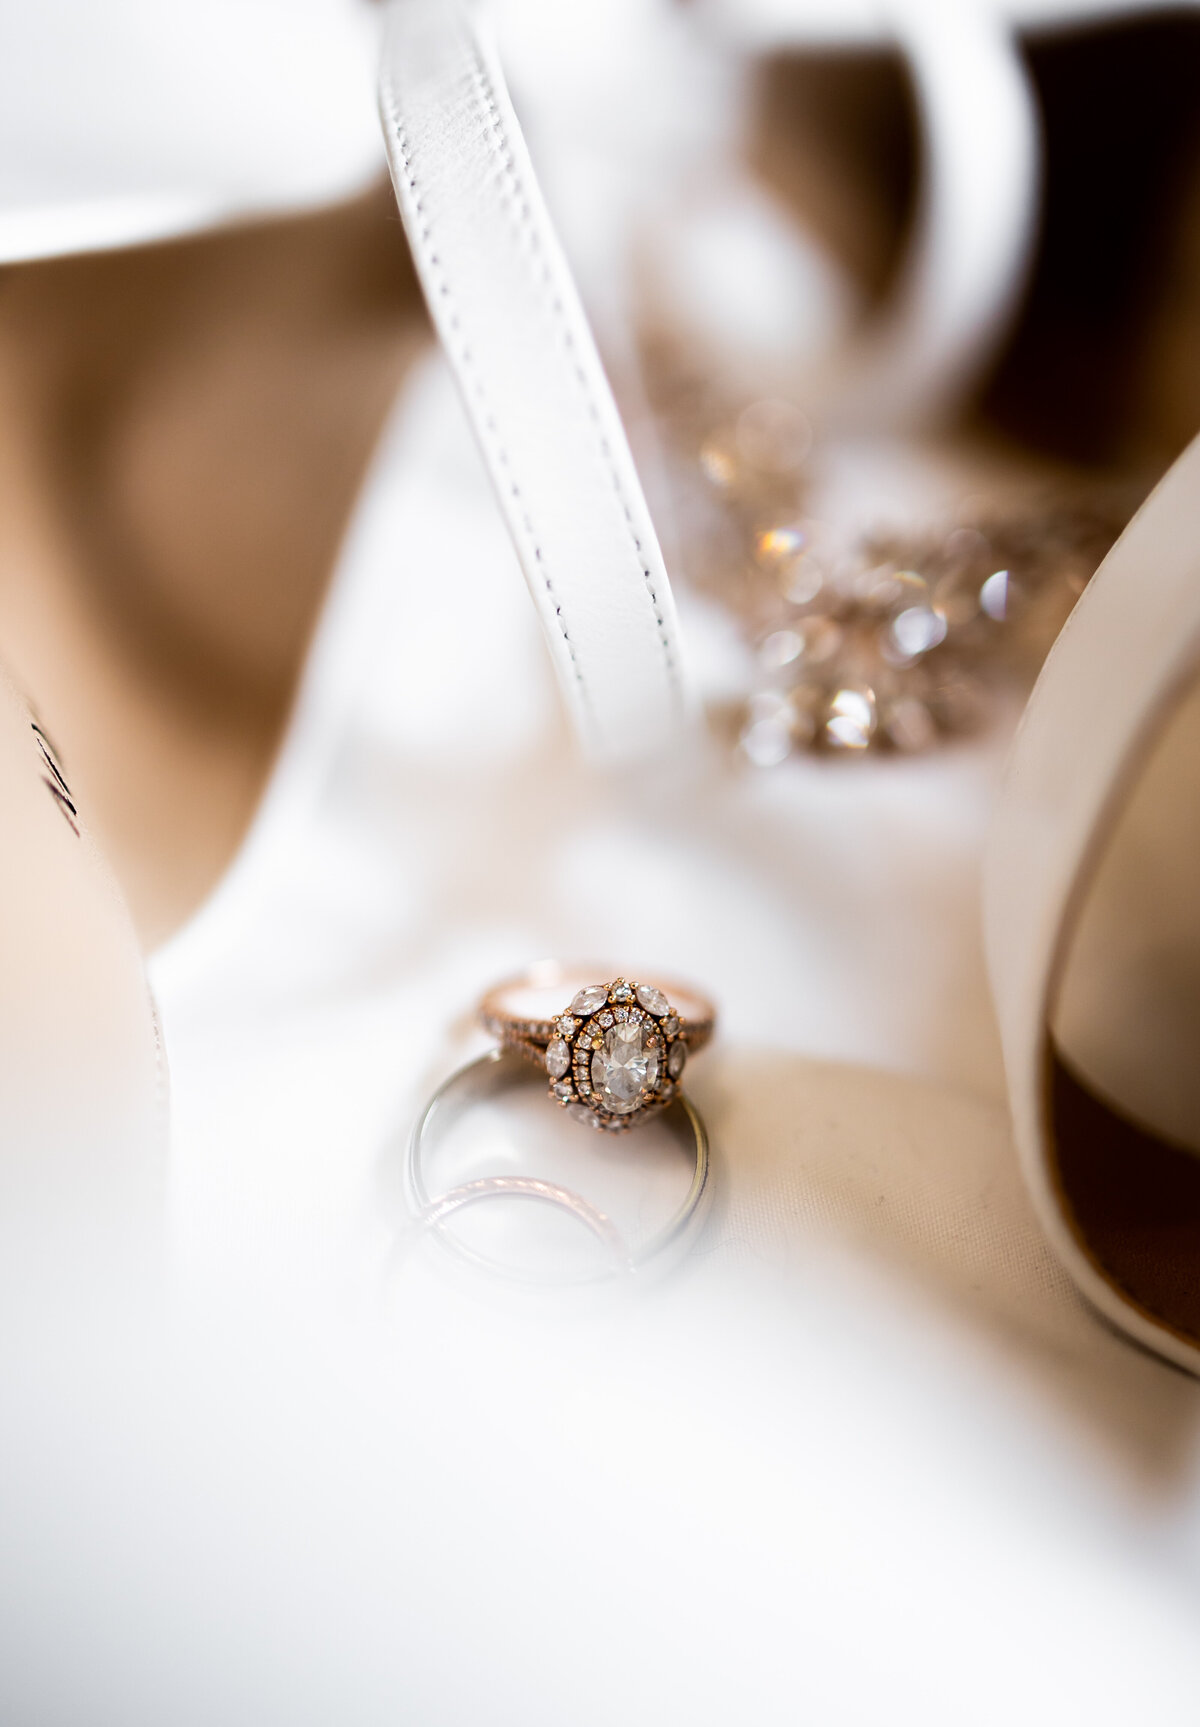 This stunning photograph features an engagement ring captured in a light and airy style, emphasizing the delicate craftsmanship and brilliant sparkle of the gemstone. Set against a soft, blurred background that enhances the ring's elegance, this image beautifully illustrates the romantic and sophisticated essence of engagement jewelry. Ideal for couples seeking inspiration for their engagement photoshoots or for jewelers showcasing exquisite ring designs.